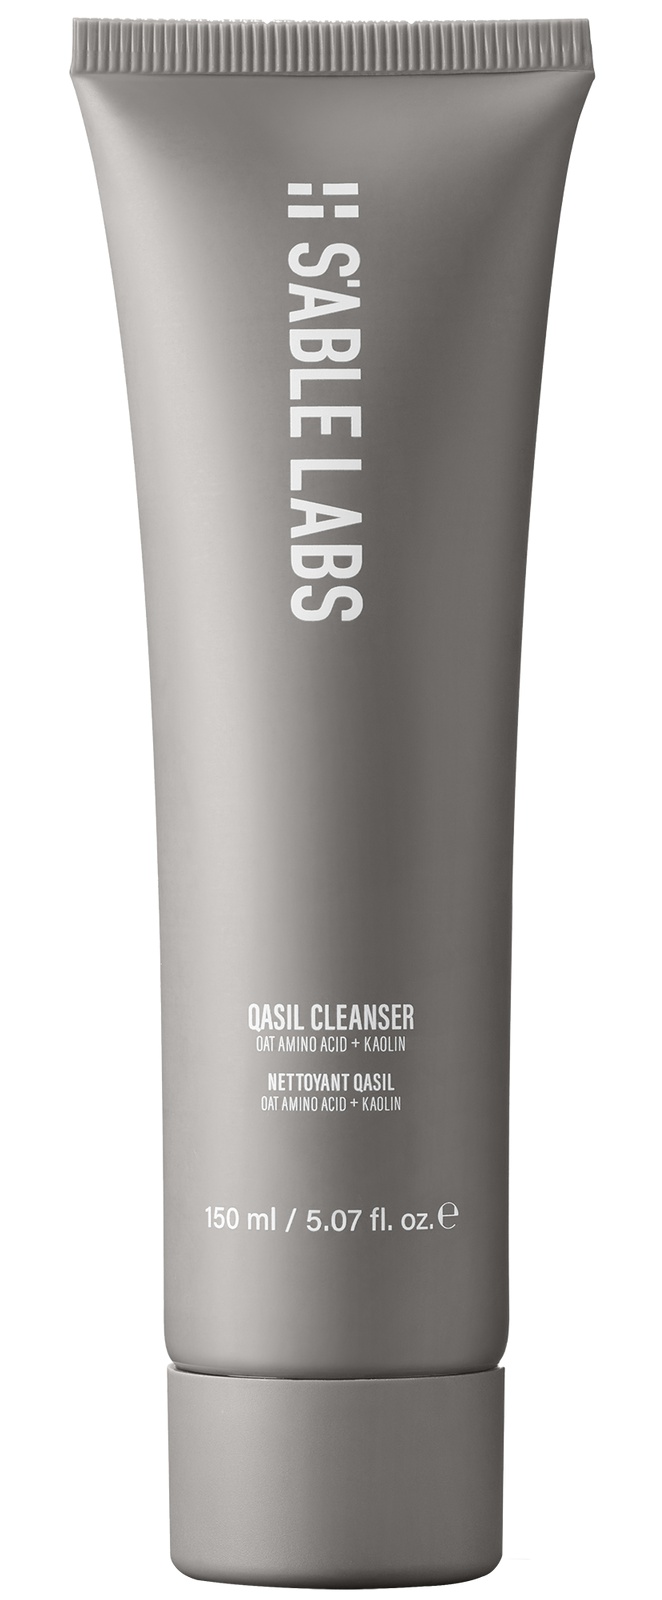 S’Able Labs Qasil Cleanser